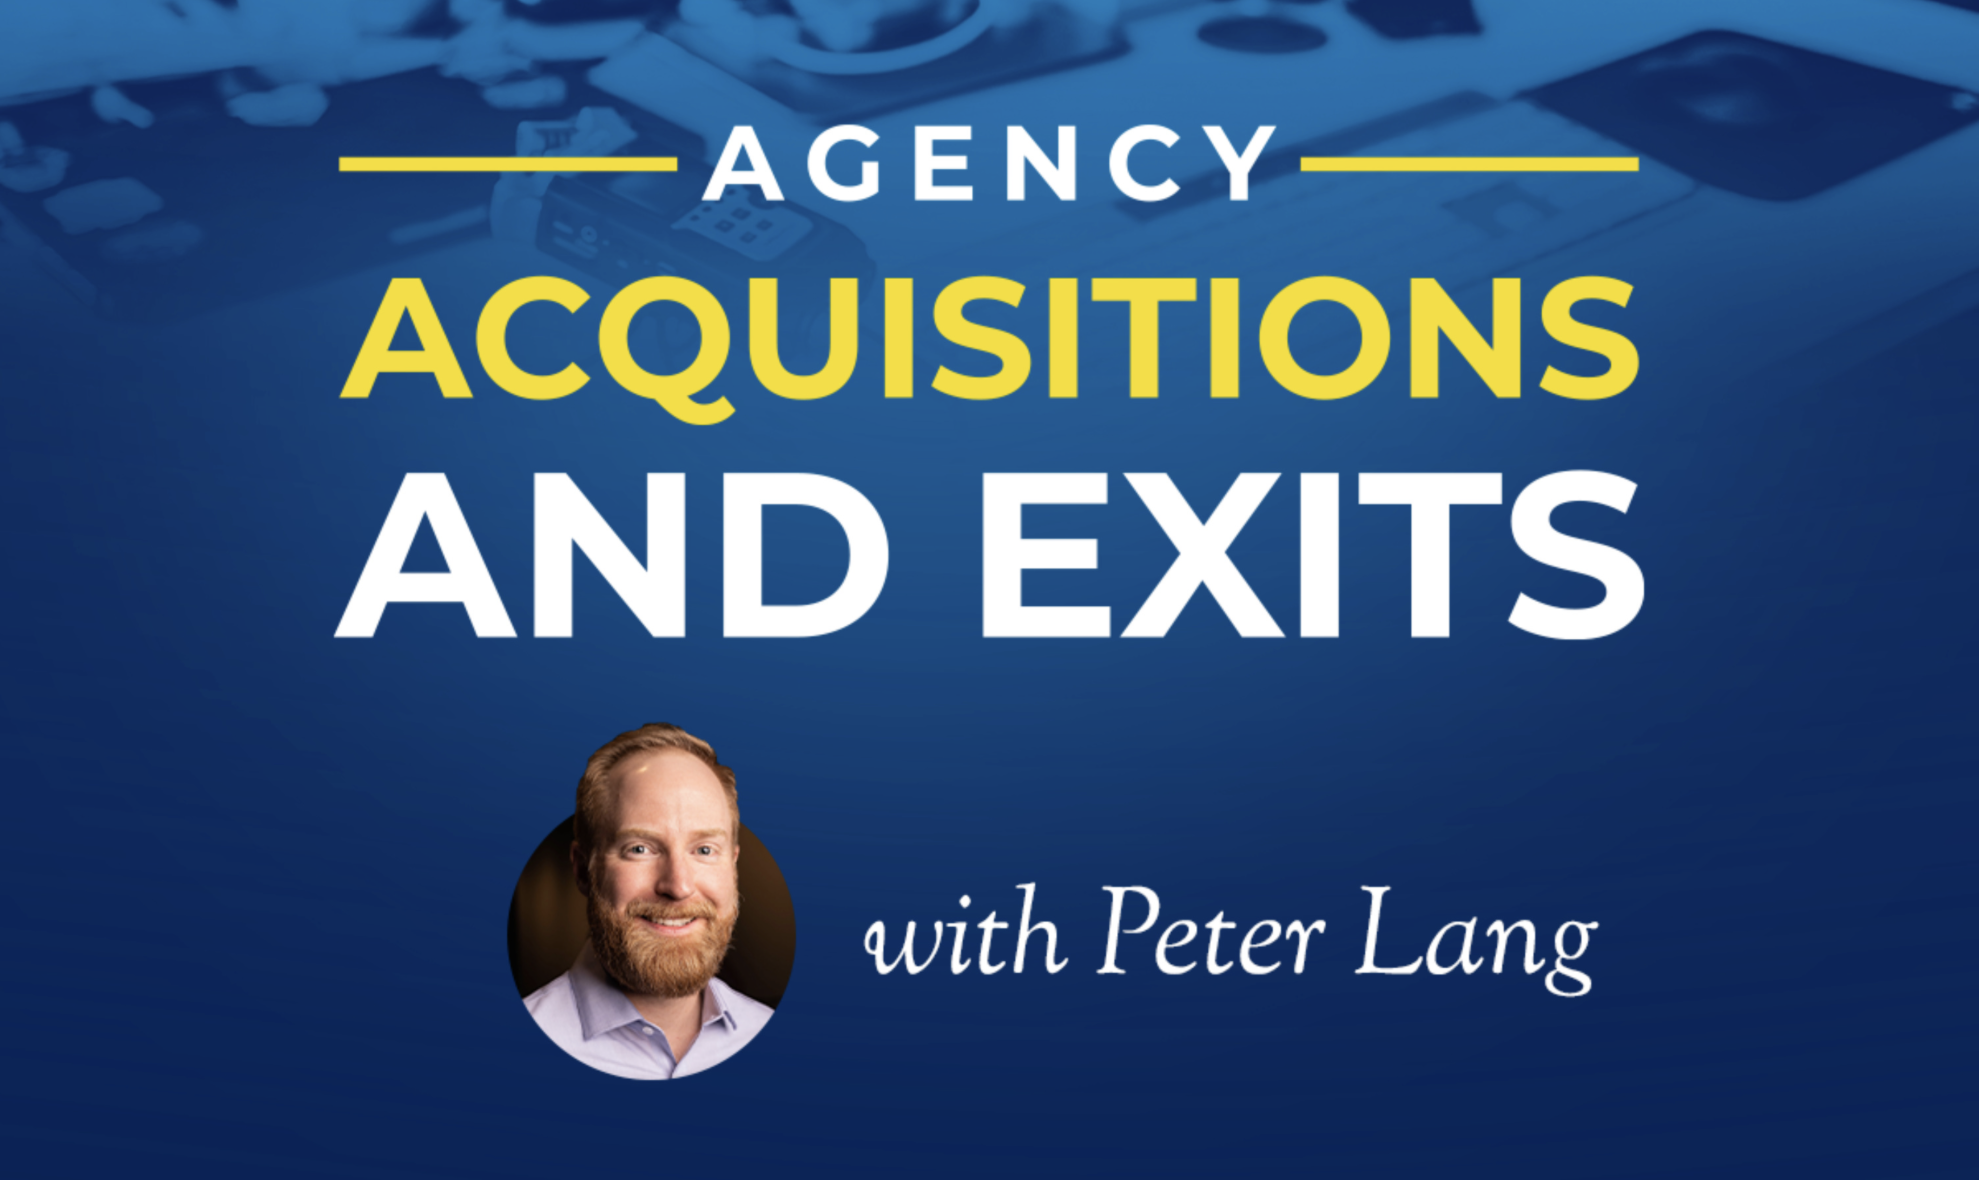 Peter Lang agency acquisitions and exits podcast